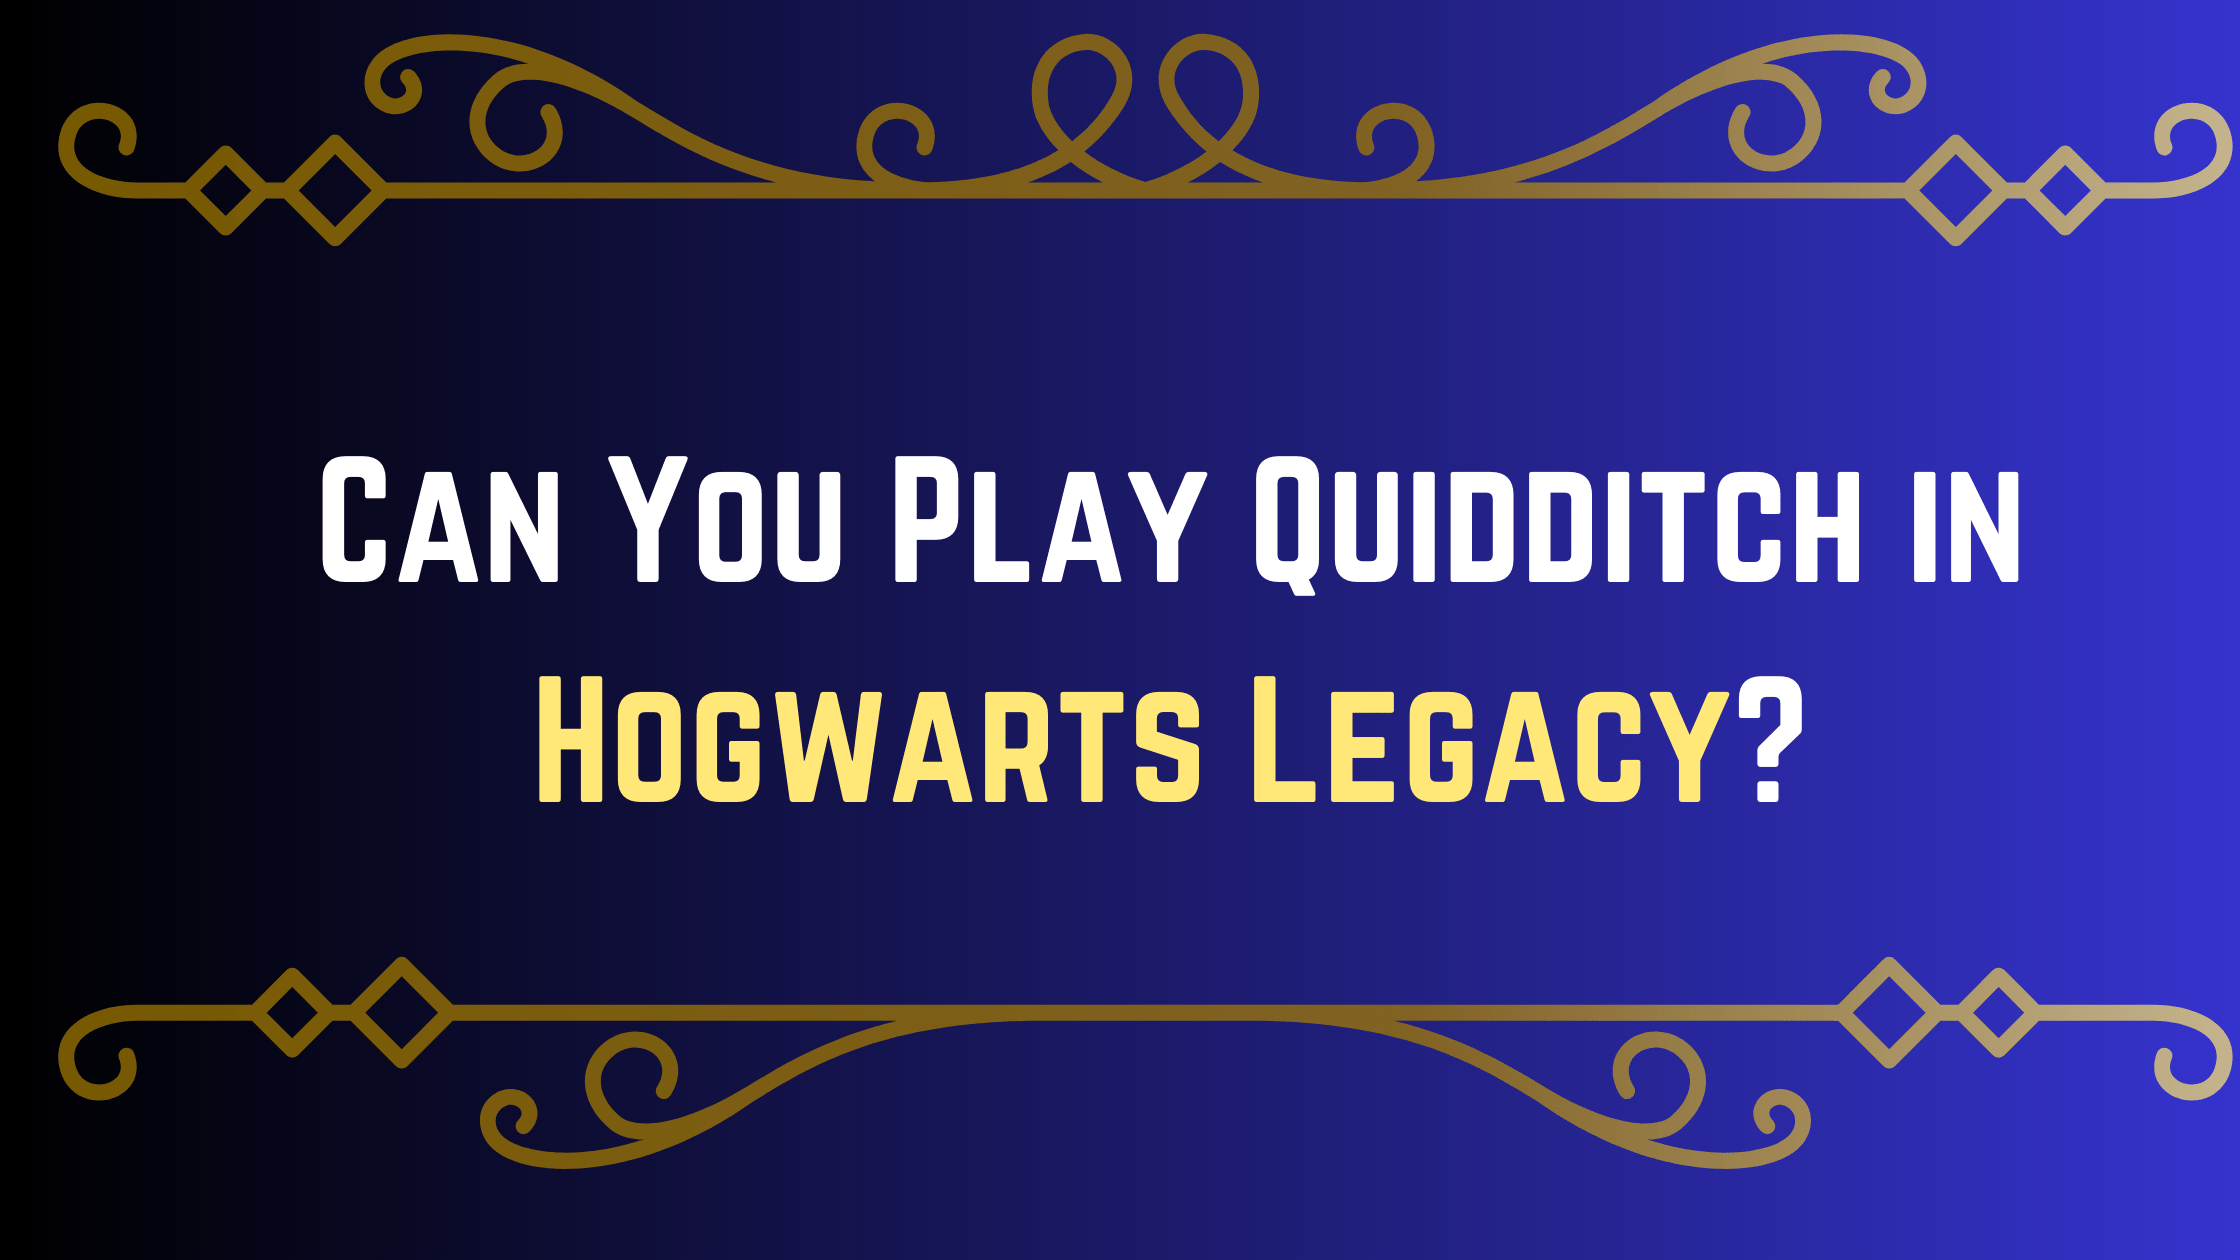 Can You Play Quidditch in Hogwarts Legacy